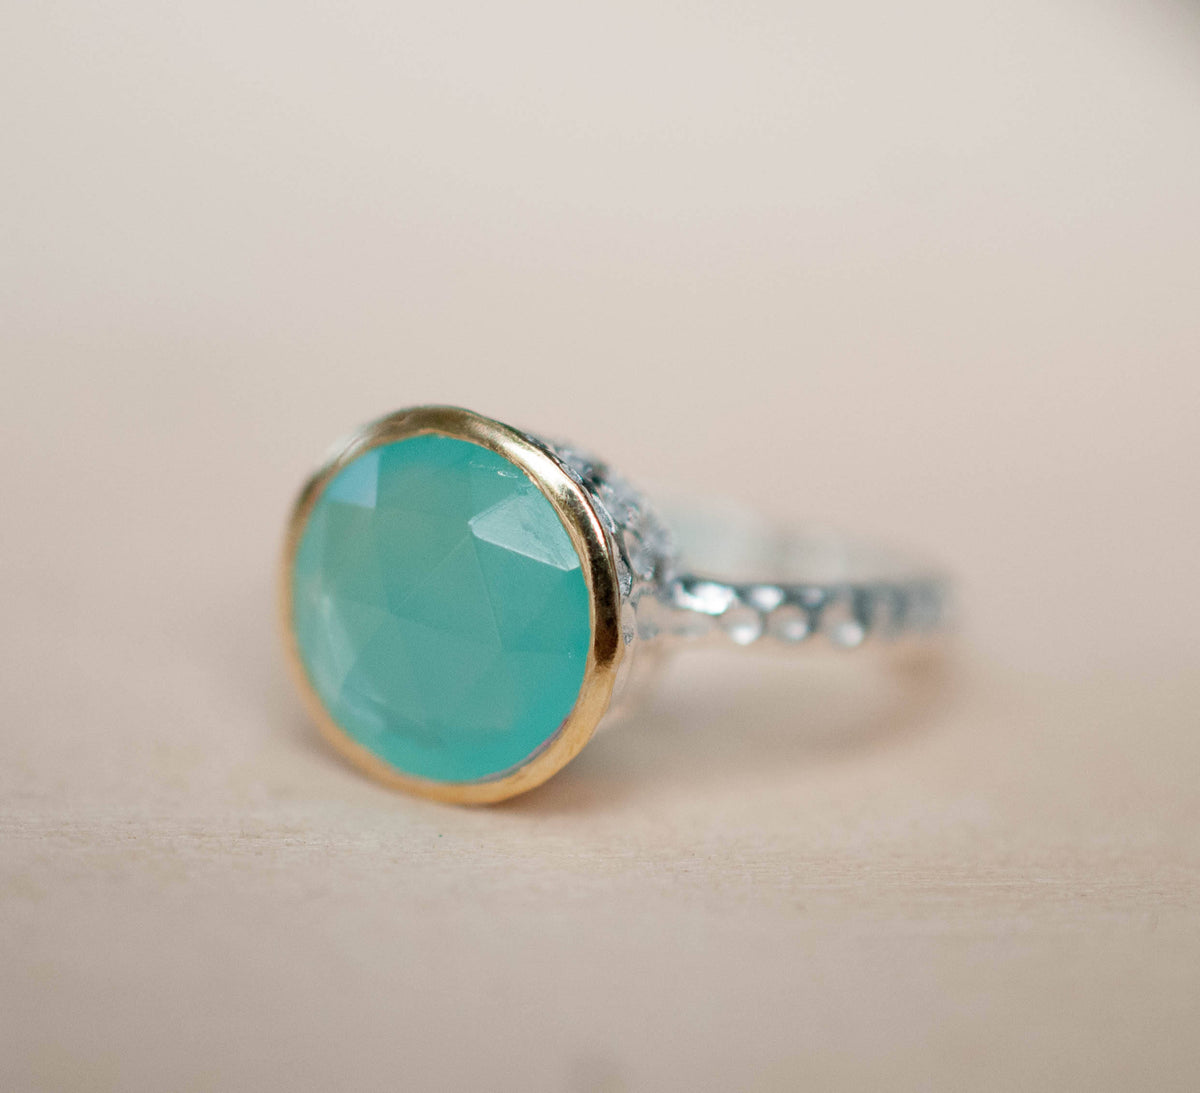 Teal Chalcedony Ring * Aqua * Sterling Silver 925 * Jewelry * Boho * Bycila * Gemstone * Bridal * Bridesmaid Gift * Solitaire * BJR078